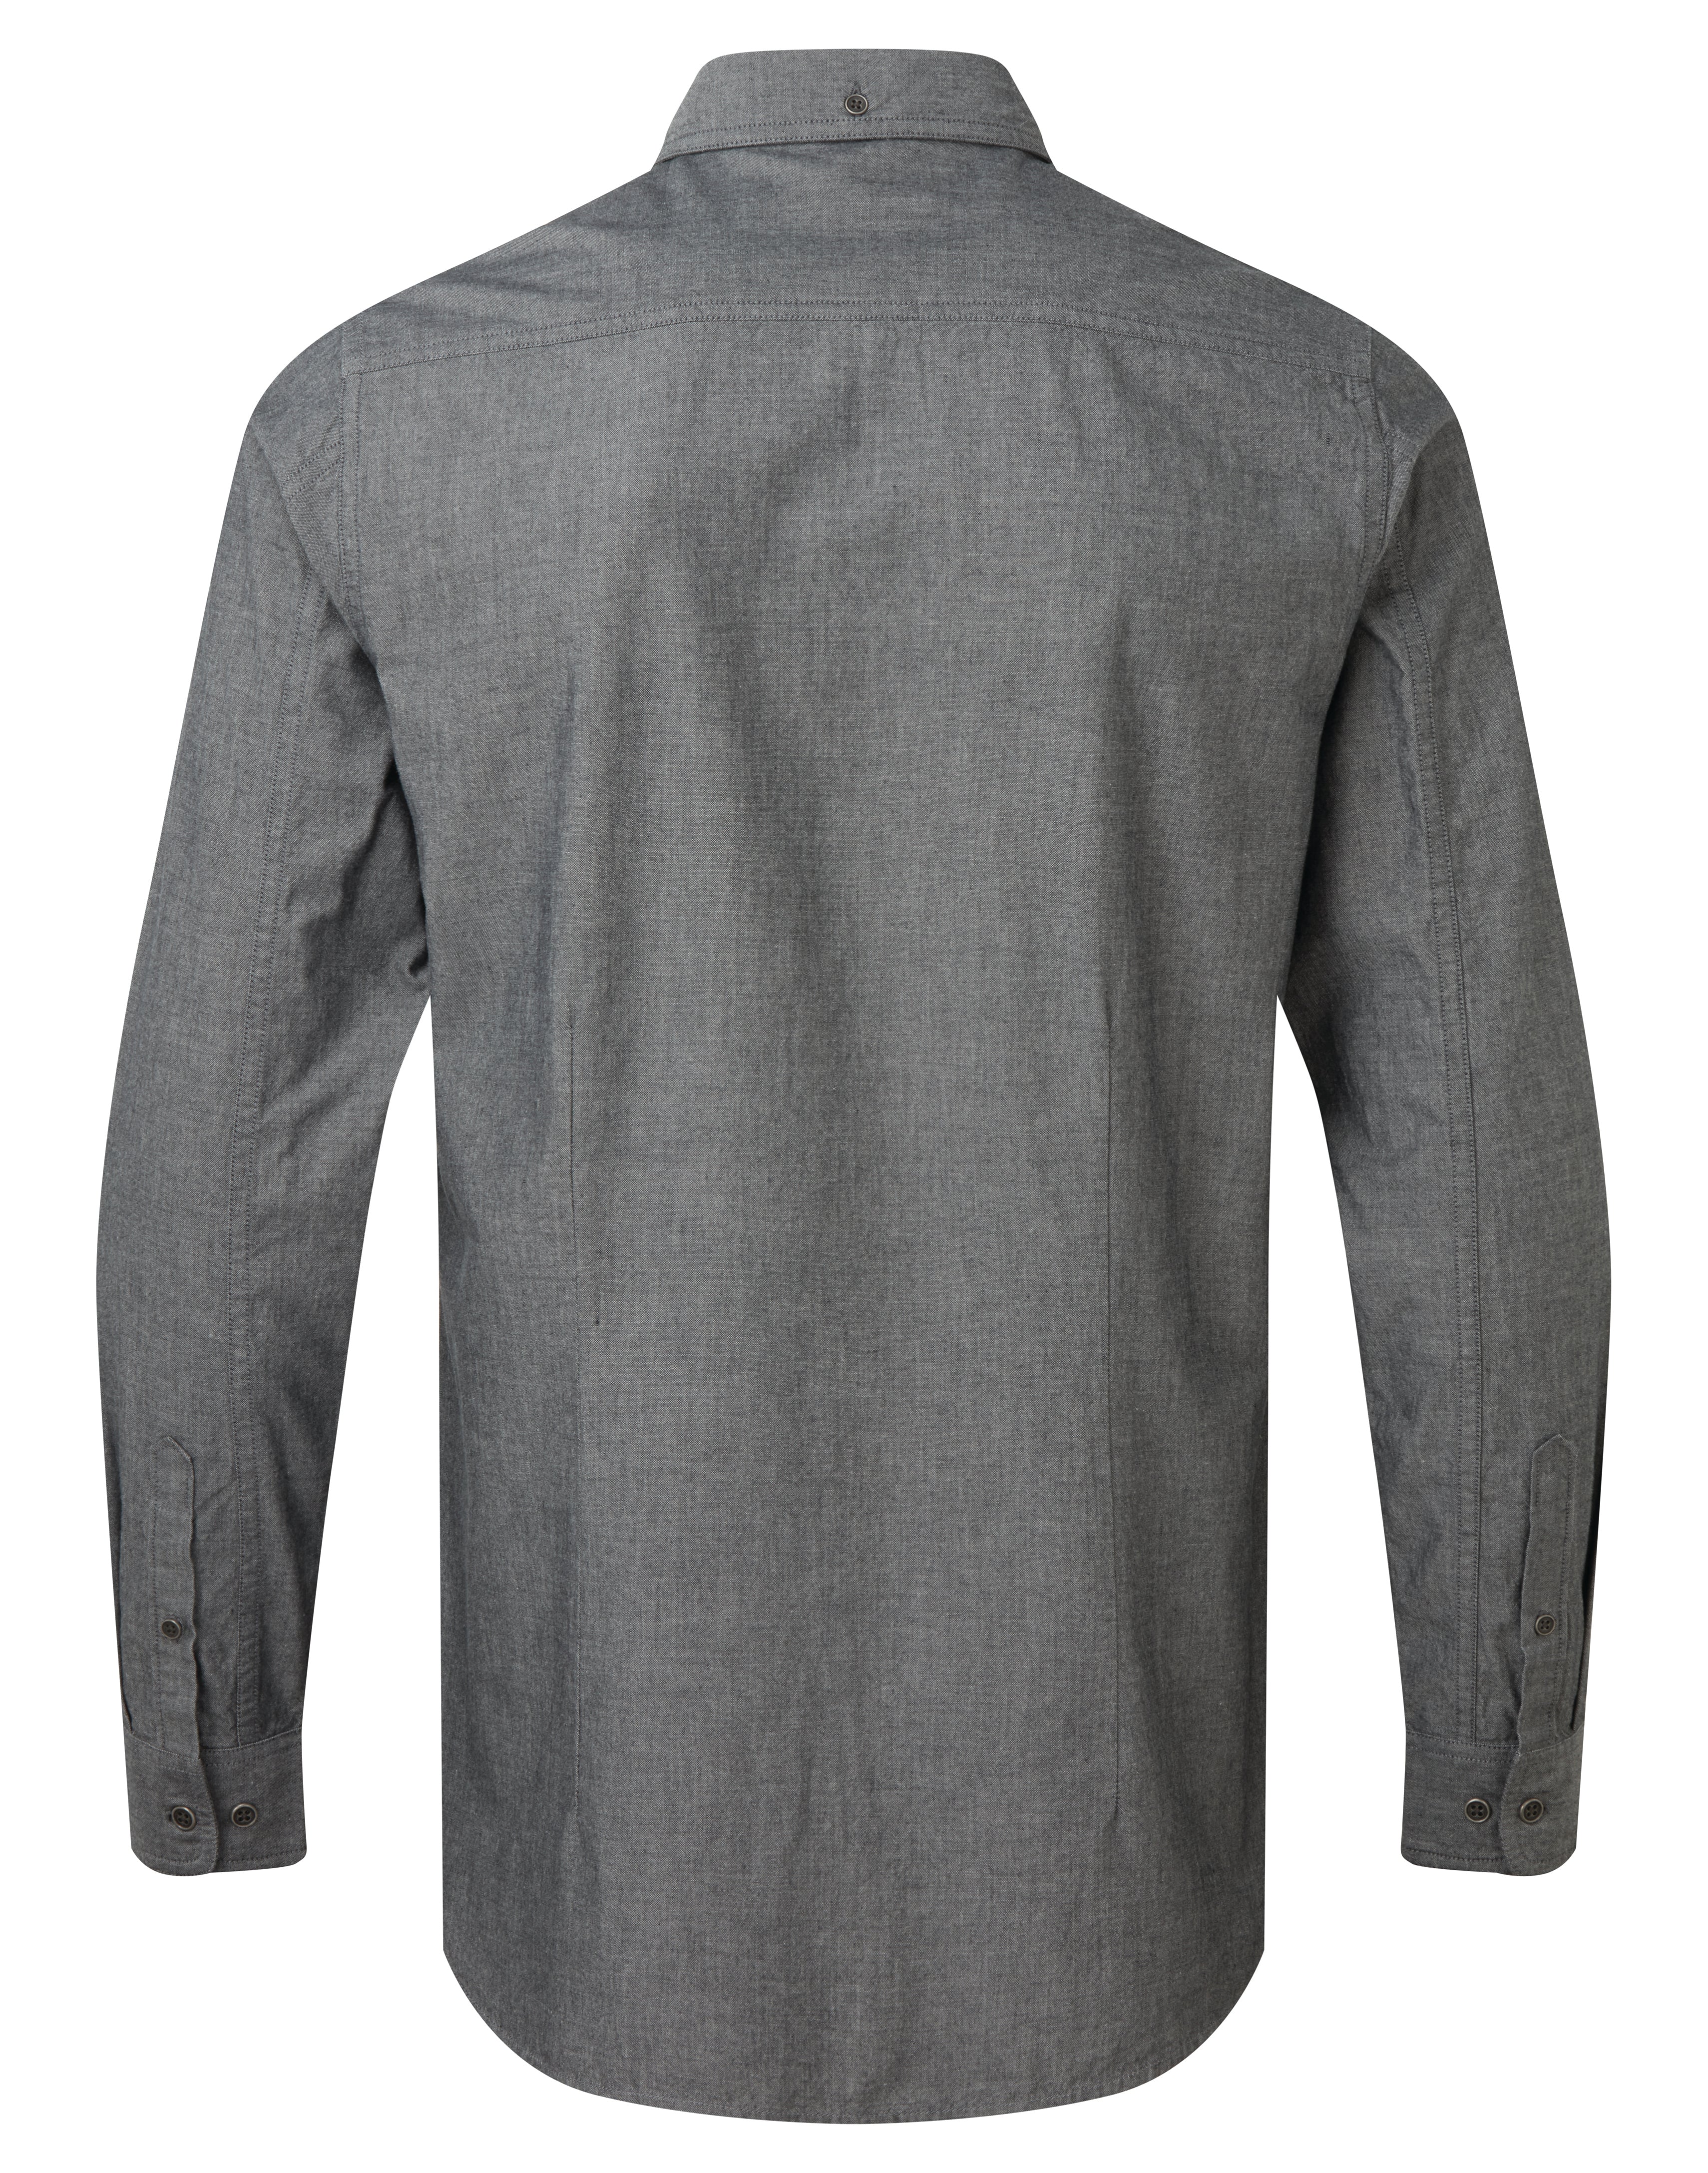 Men’s Chambray shirt, organic and Fairtrade certified - Premier Collection